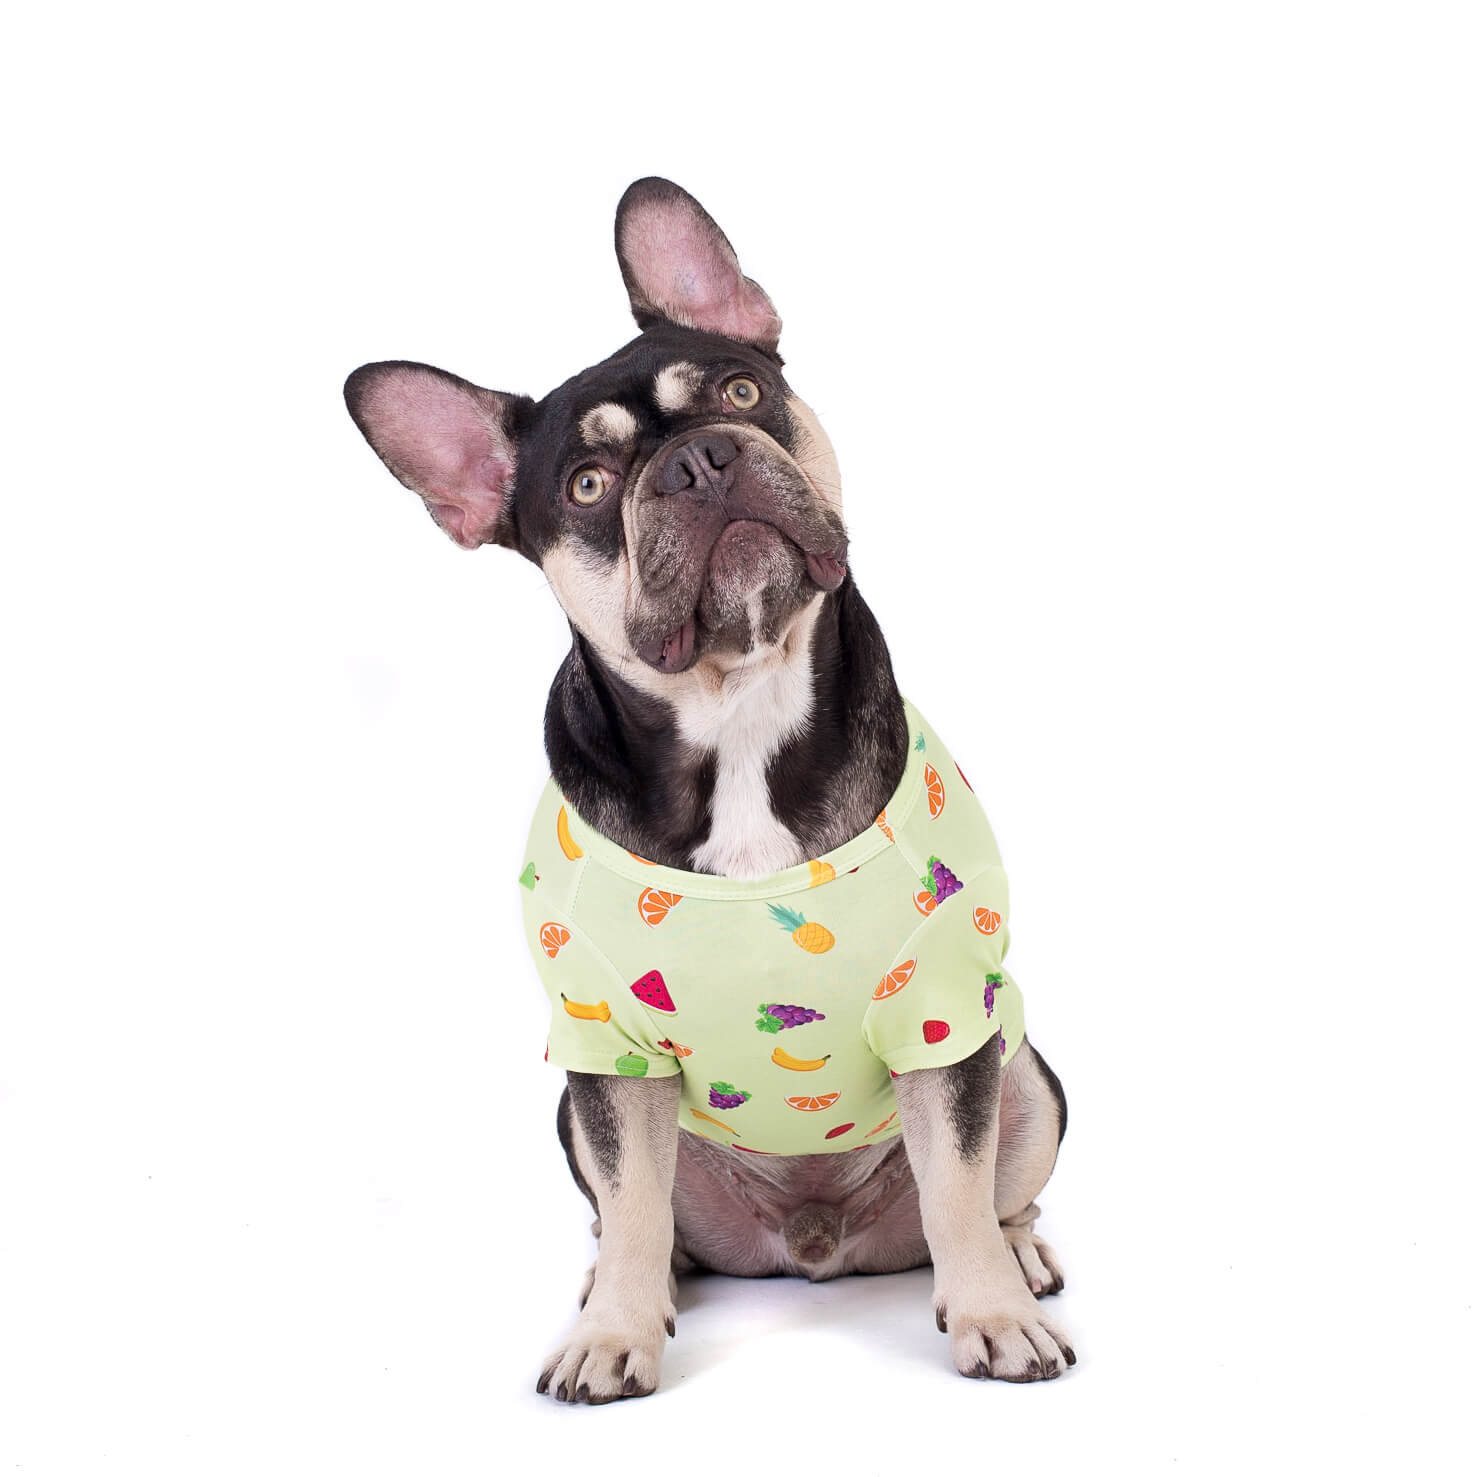 A lovable French Bulldog capturing hearts with an endearing head tilt, exuding charm and curiosity while donning a Feelin'Fruity dog shirt that adds a touch of playful style to their adorable pose.